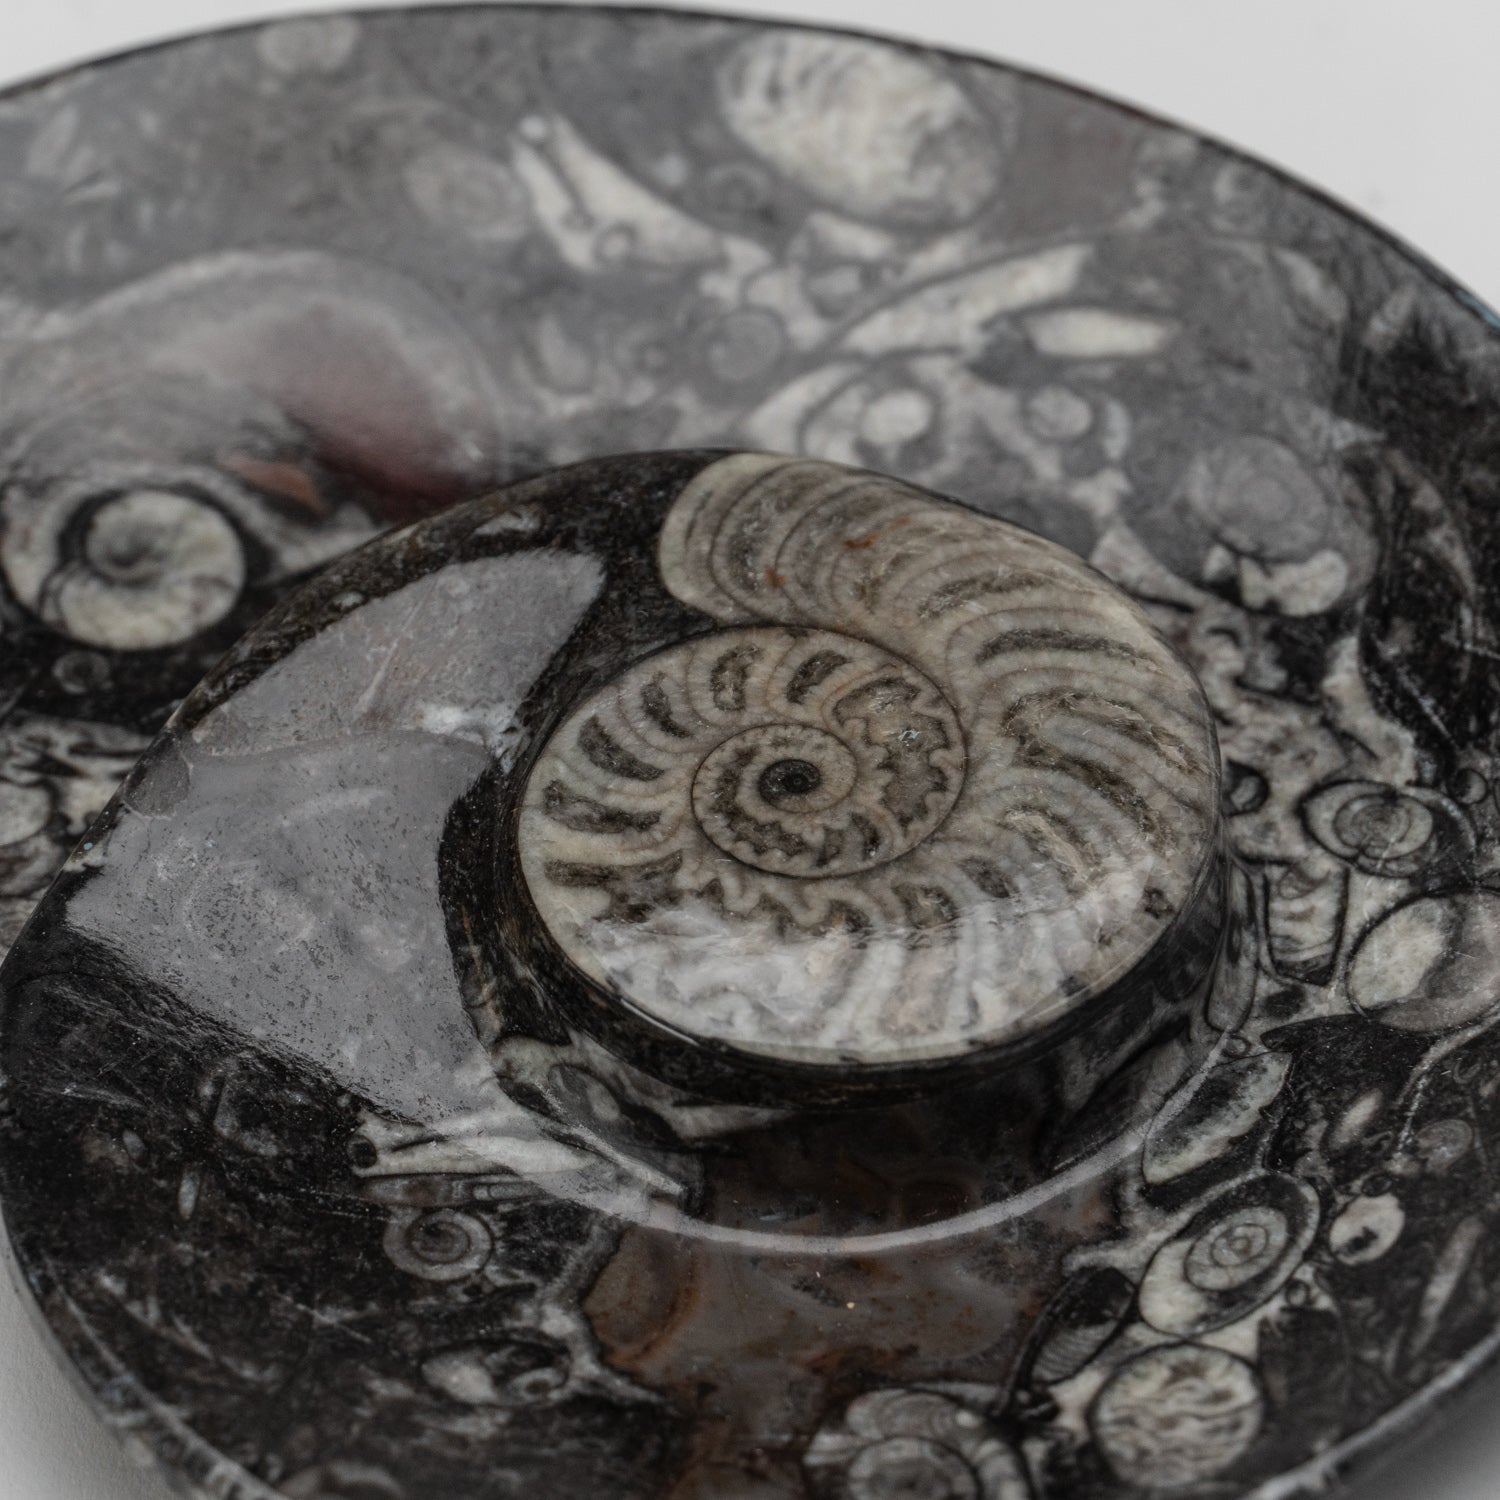 Polished Ammonite and Orthoceras Fossil Spiral Plate (Small)